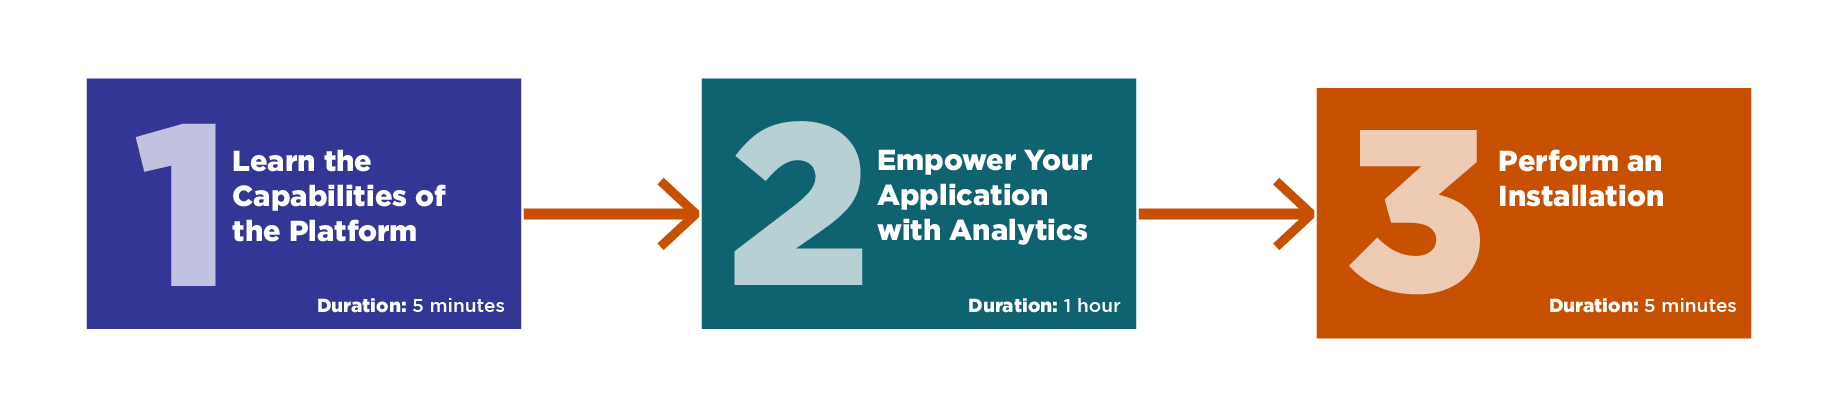 This path contains three sections. One, Learn the capabilities of the platform, 5 minutes. Two, 2. Empower your application with analytics, 1 hour. Three, Perform an installation, 5 minutes. 